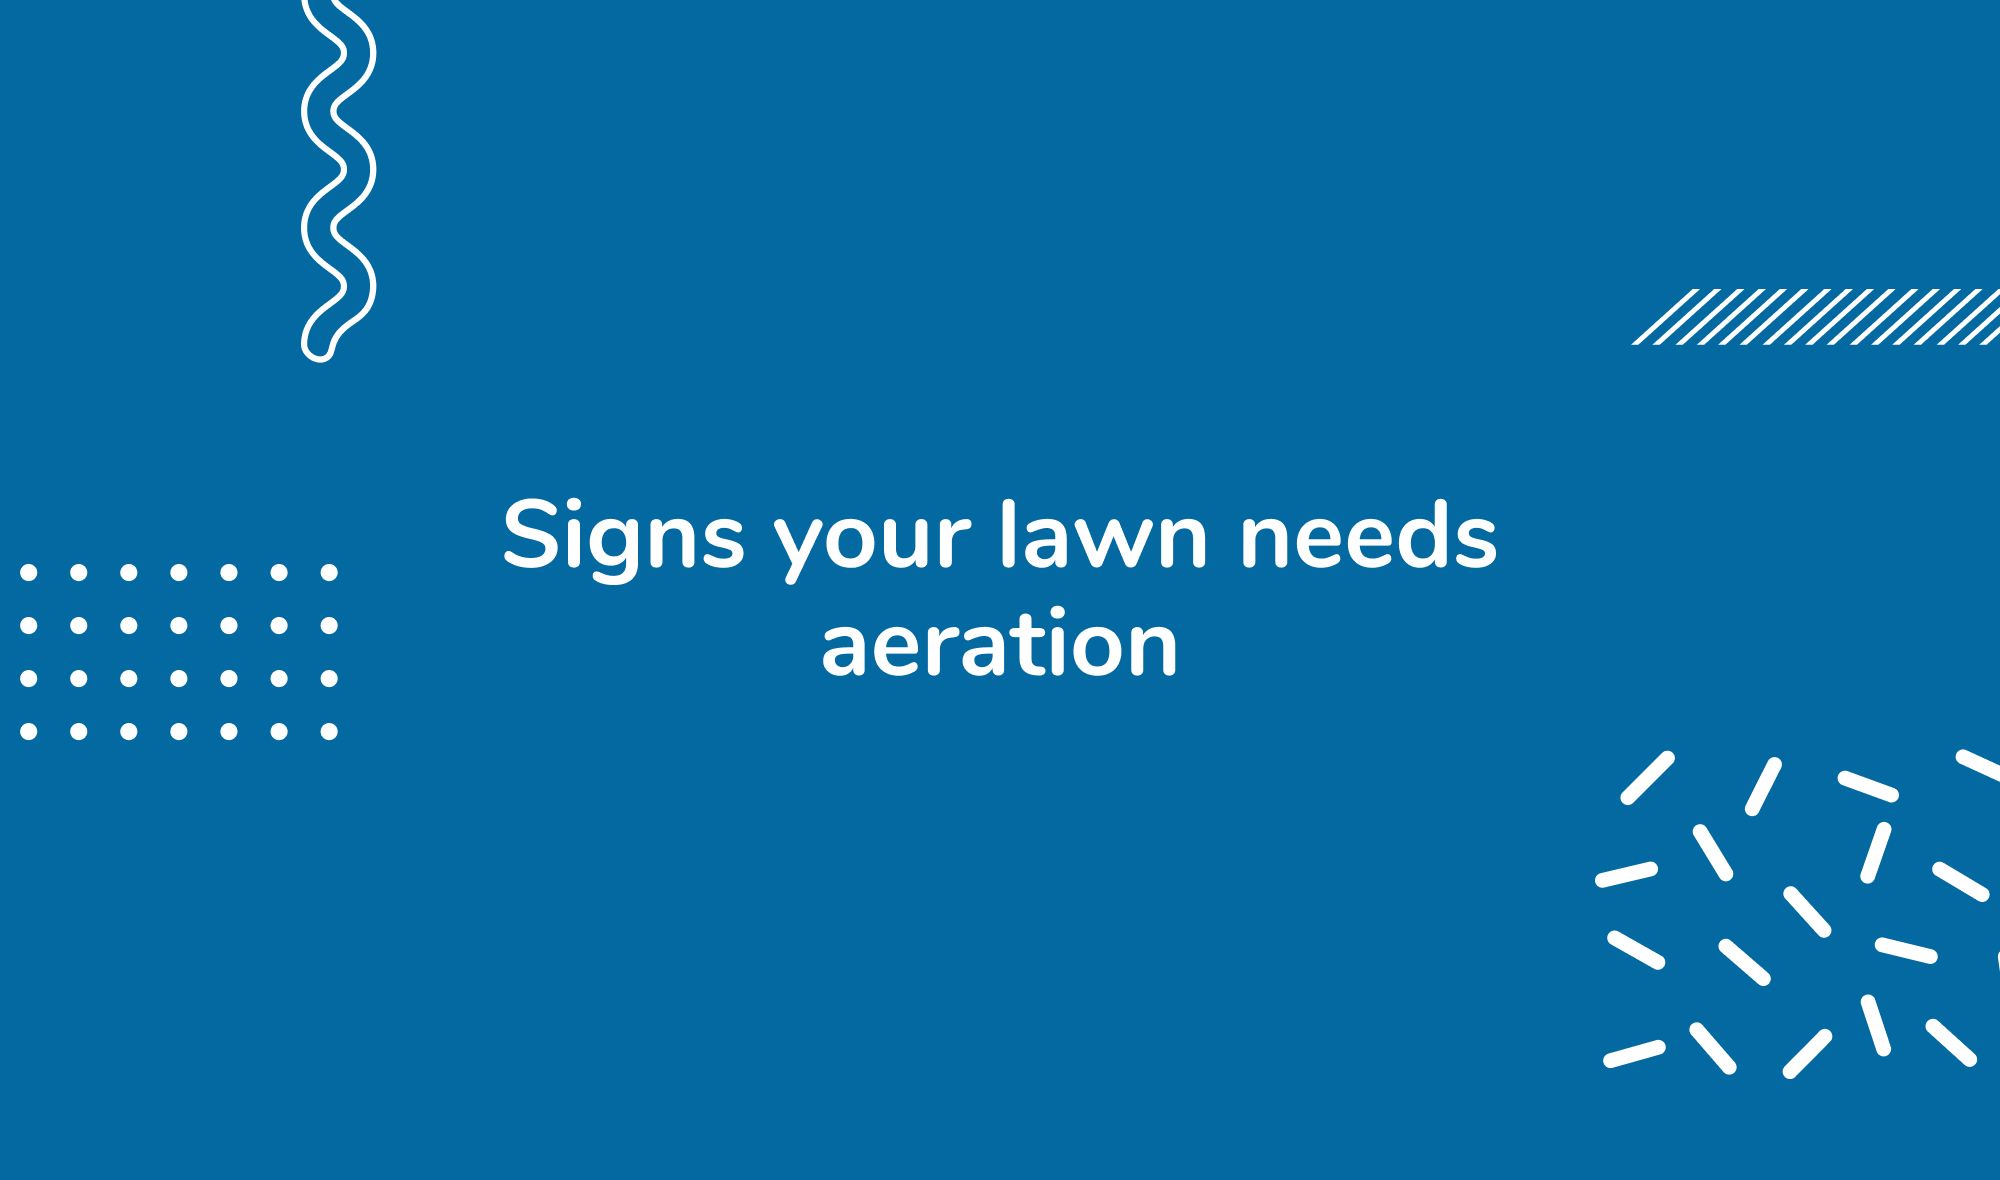 Signs your lawn needs aeration